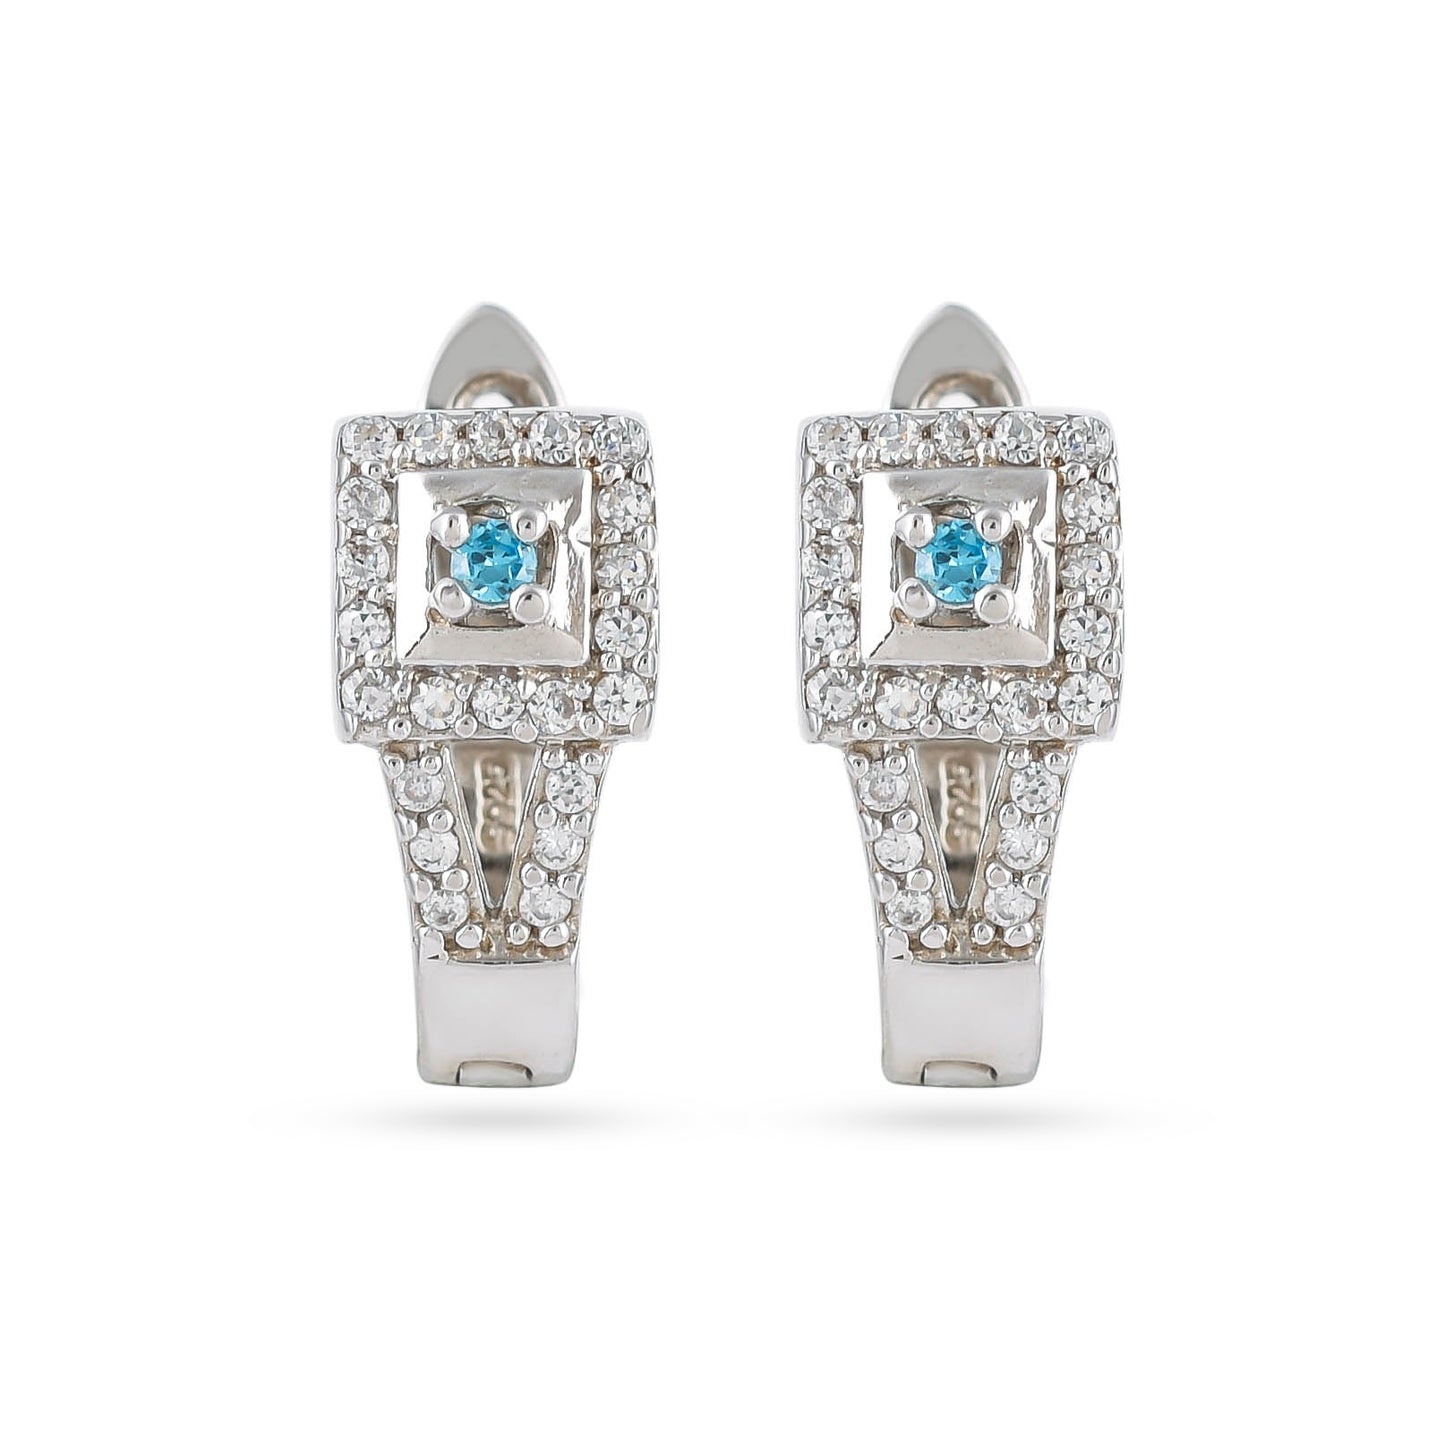 Silver Sparkling Shine Blue Cz Earrings - From Purl Purl